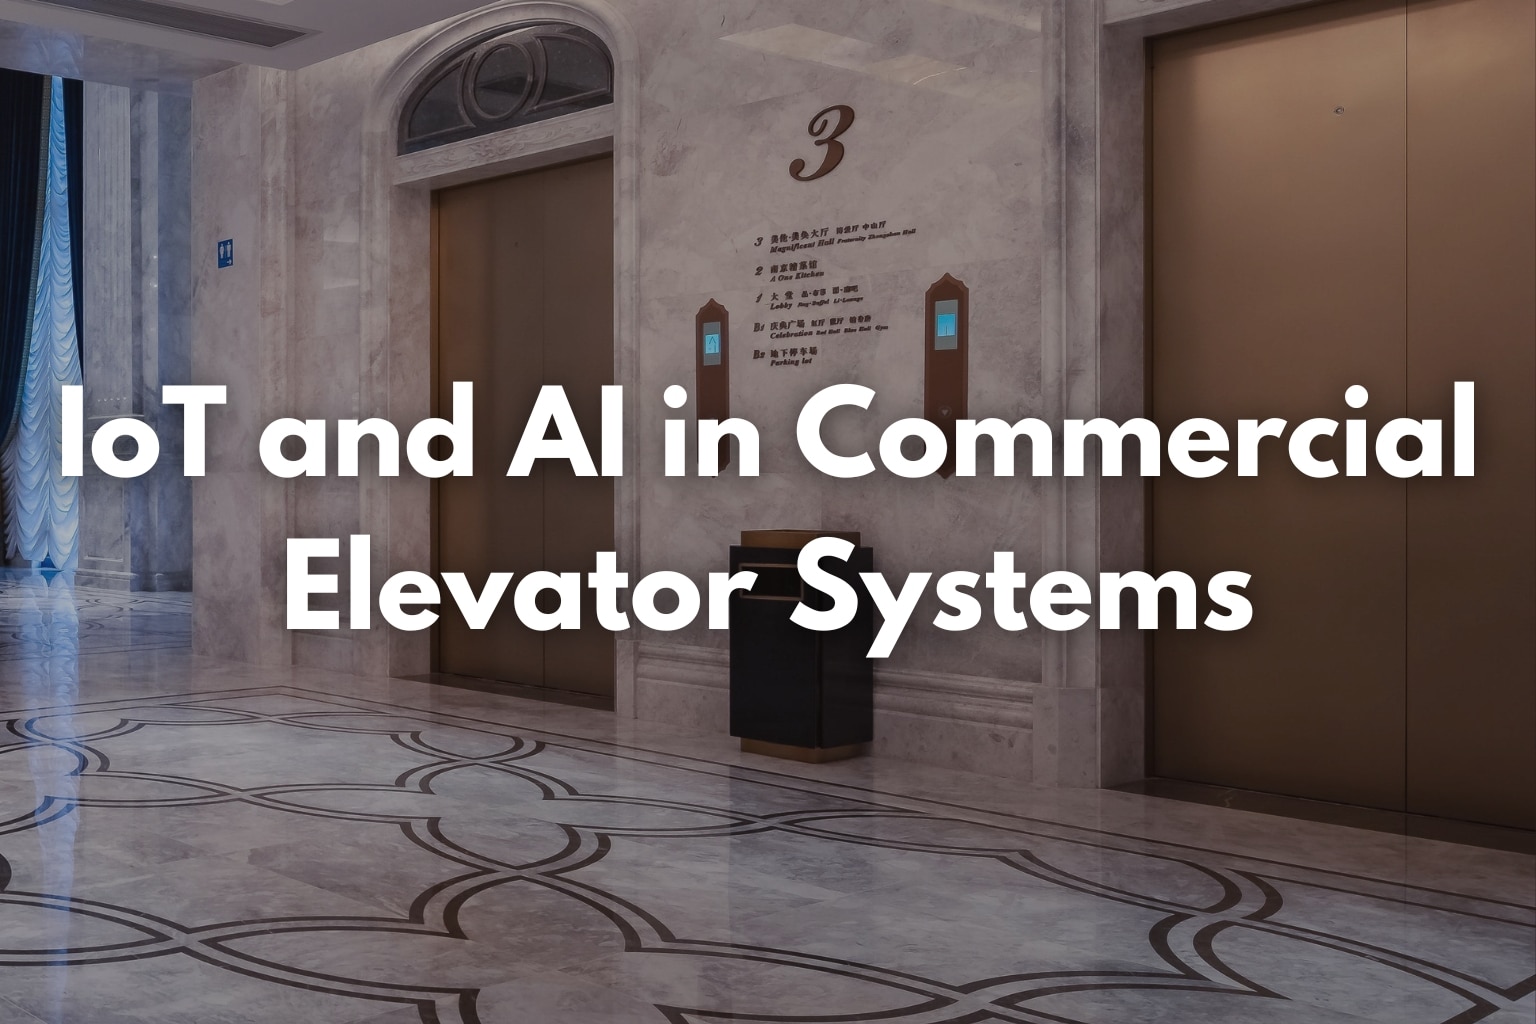 IoT and AI in Commercial Elevator Systems